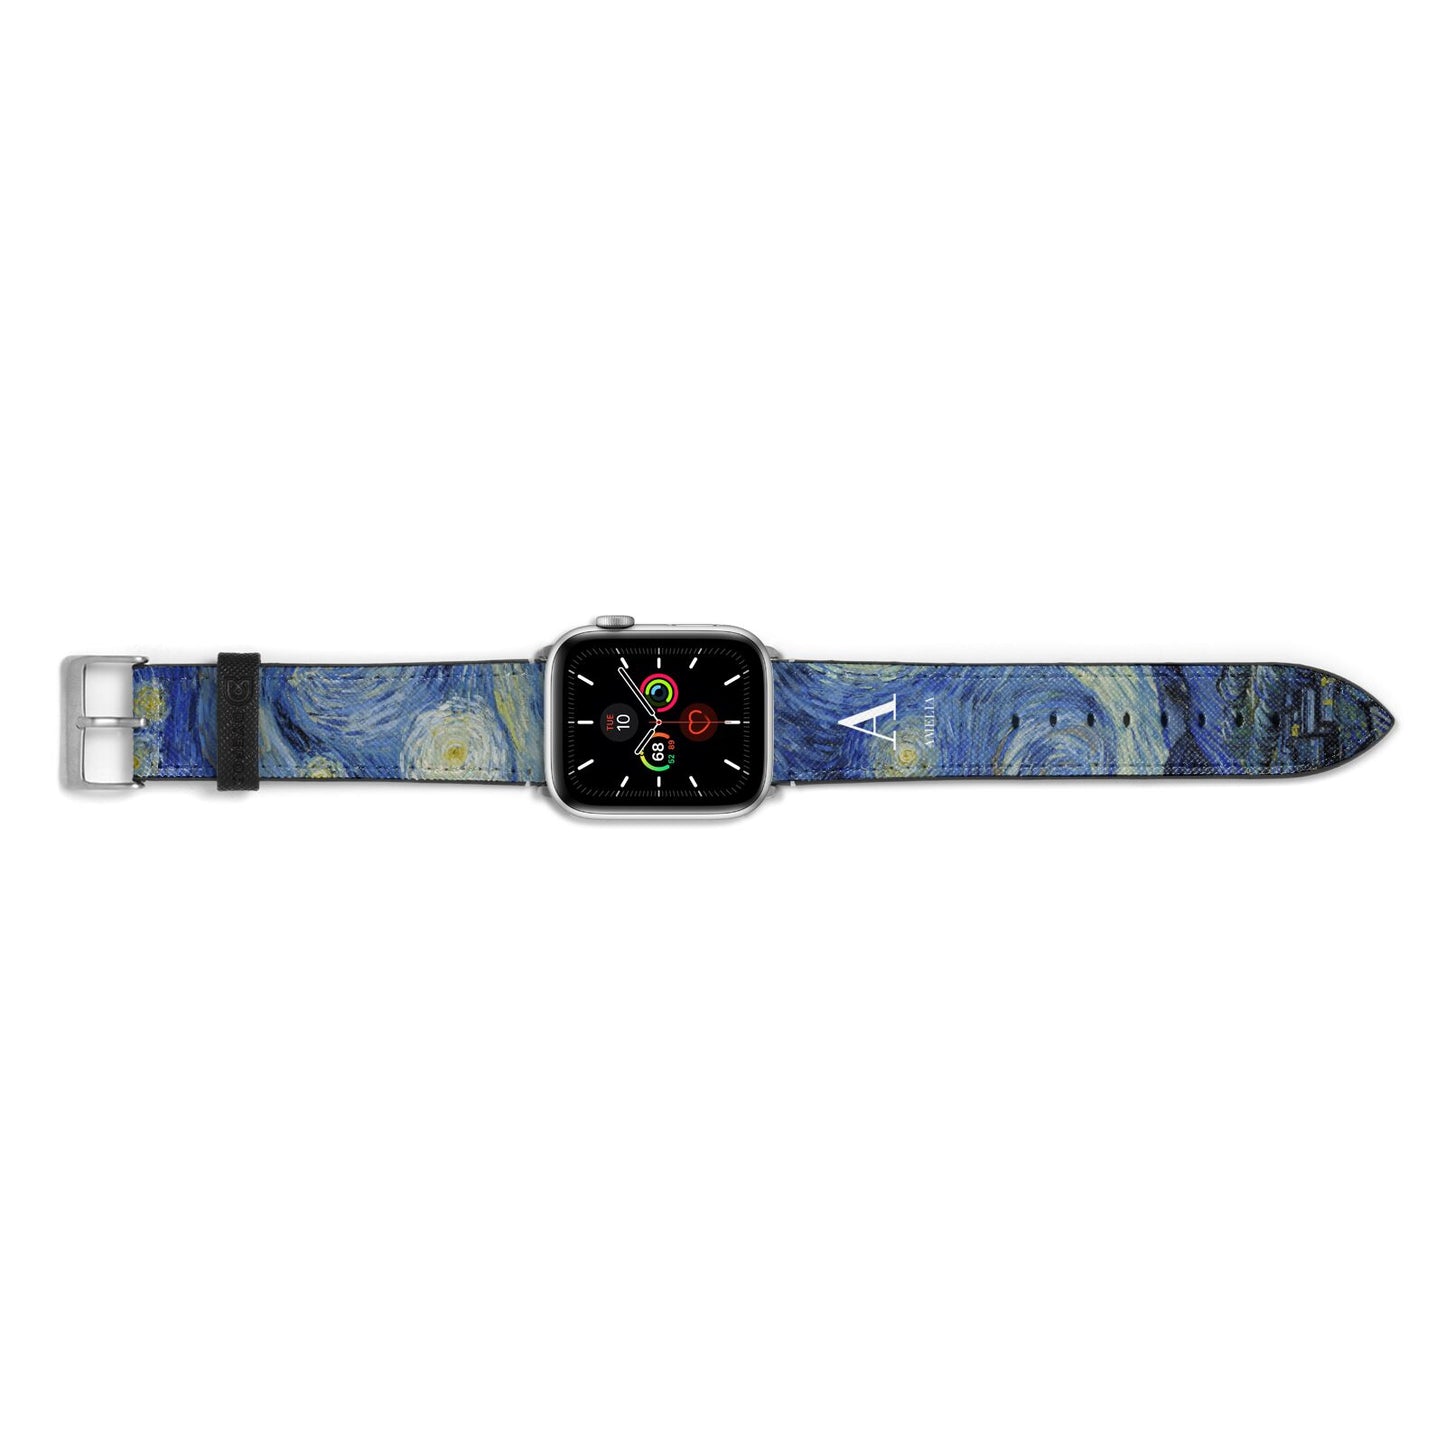 Personalised Van Gogh Starry Night Apple Watch Strap Landscape Image Silver Hardware